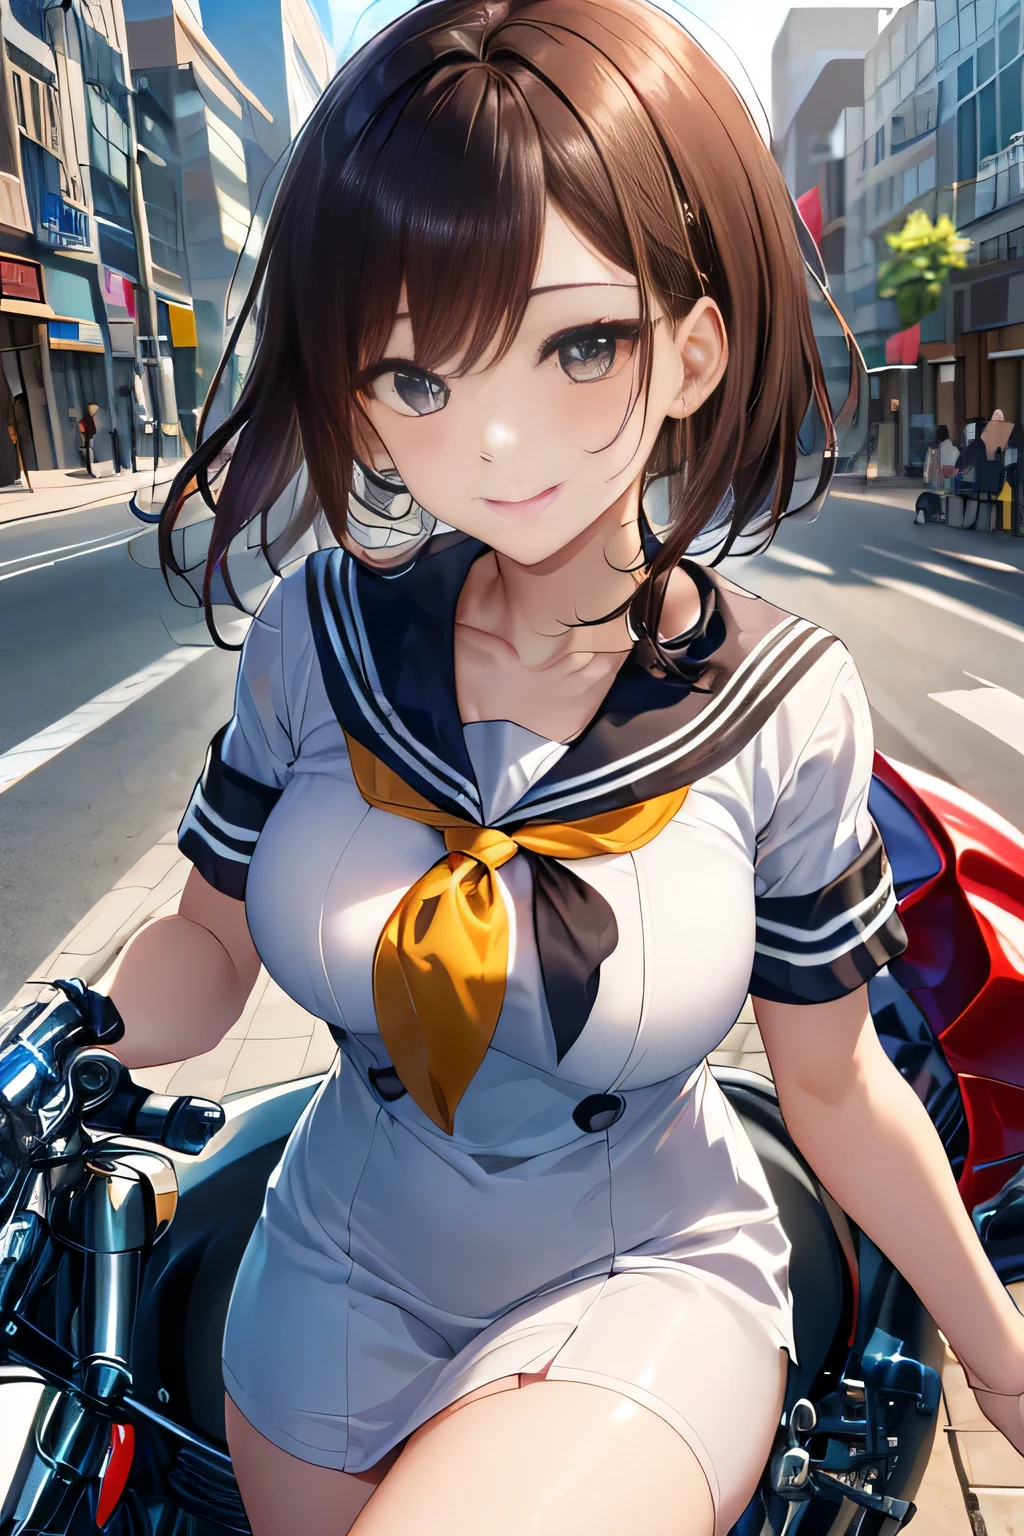 big and full breasts、(((A transparent white sailor suit that sticks to the chest,school uniform:1.7))),(((A woman wearing a transparent sailor suit:1.7 ))),(((A woman riding a colorful custom-painted motorcycle through the city:1.7))), Shiny light brown and orange striped short hair,cute smile,perfect round face,A cheerful smile that makes the viewer happy,proper body proportions,table top,Ultra high quality output image,High resolution,intricate details,very delicate and beautiful hair,realistic pictures,dream-like,professional lighting,realistic shadow,focus only,beautiful hands,beautiful fingers,Detailed functions of fingers,Detailed features of the wear,Detailed characteristics of hair,detailed facial features,(((emphasize the chest:1.3))),(dynamic angle),(dynamic and sexy pose),laughter、cute round face,,(table top,highest quality,Ultra-high resolution output image,) ,(8K quality,),(sea art 2 mode.1),(Image Mode Ultra HD,)